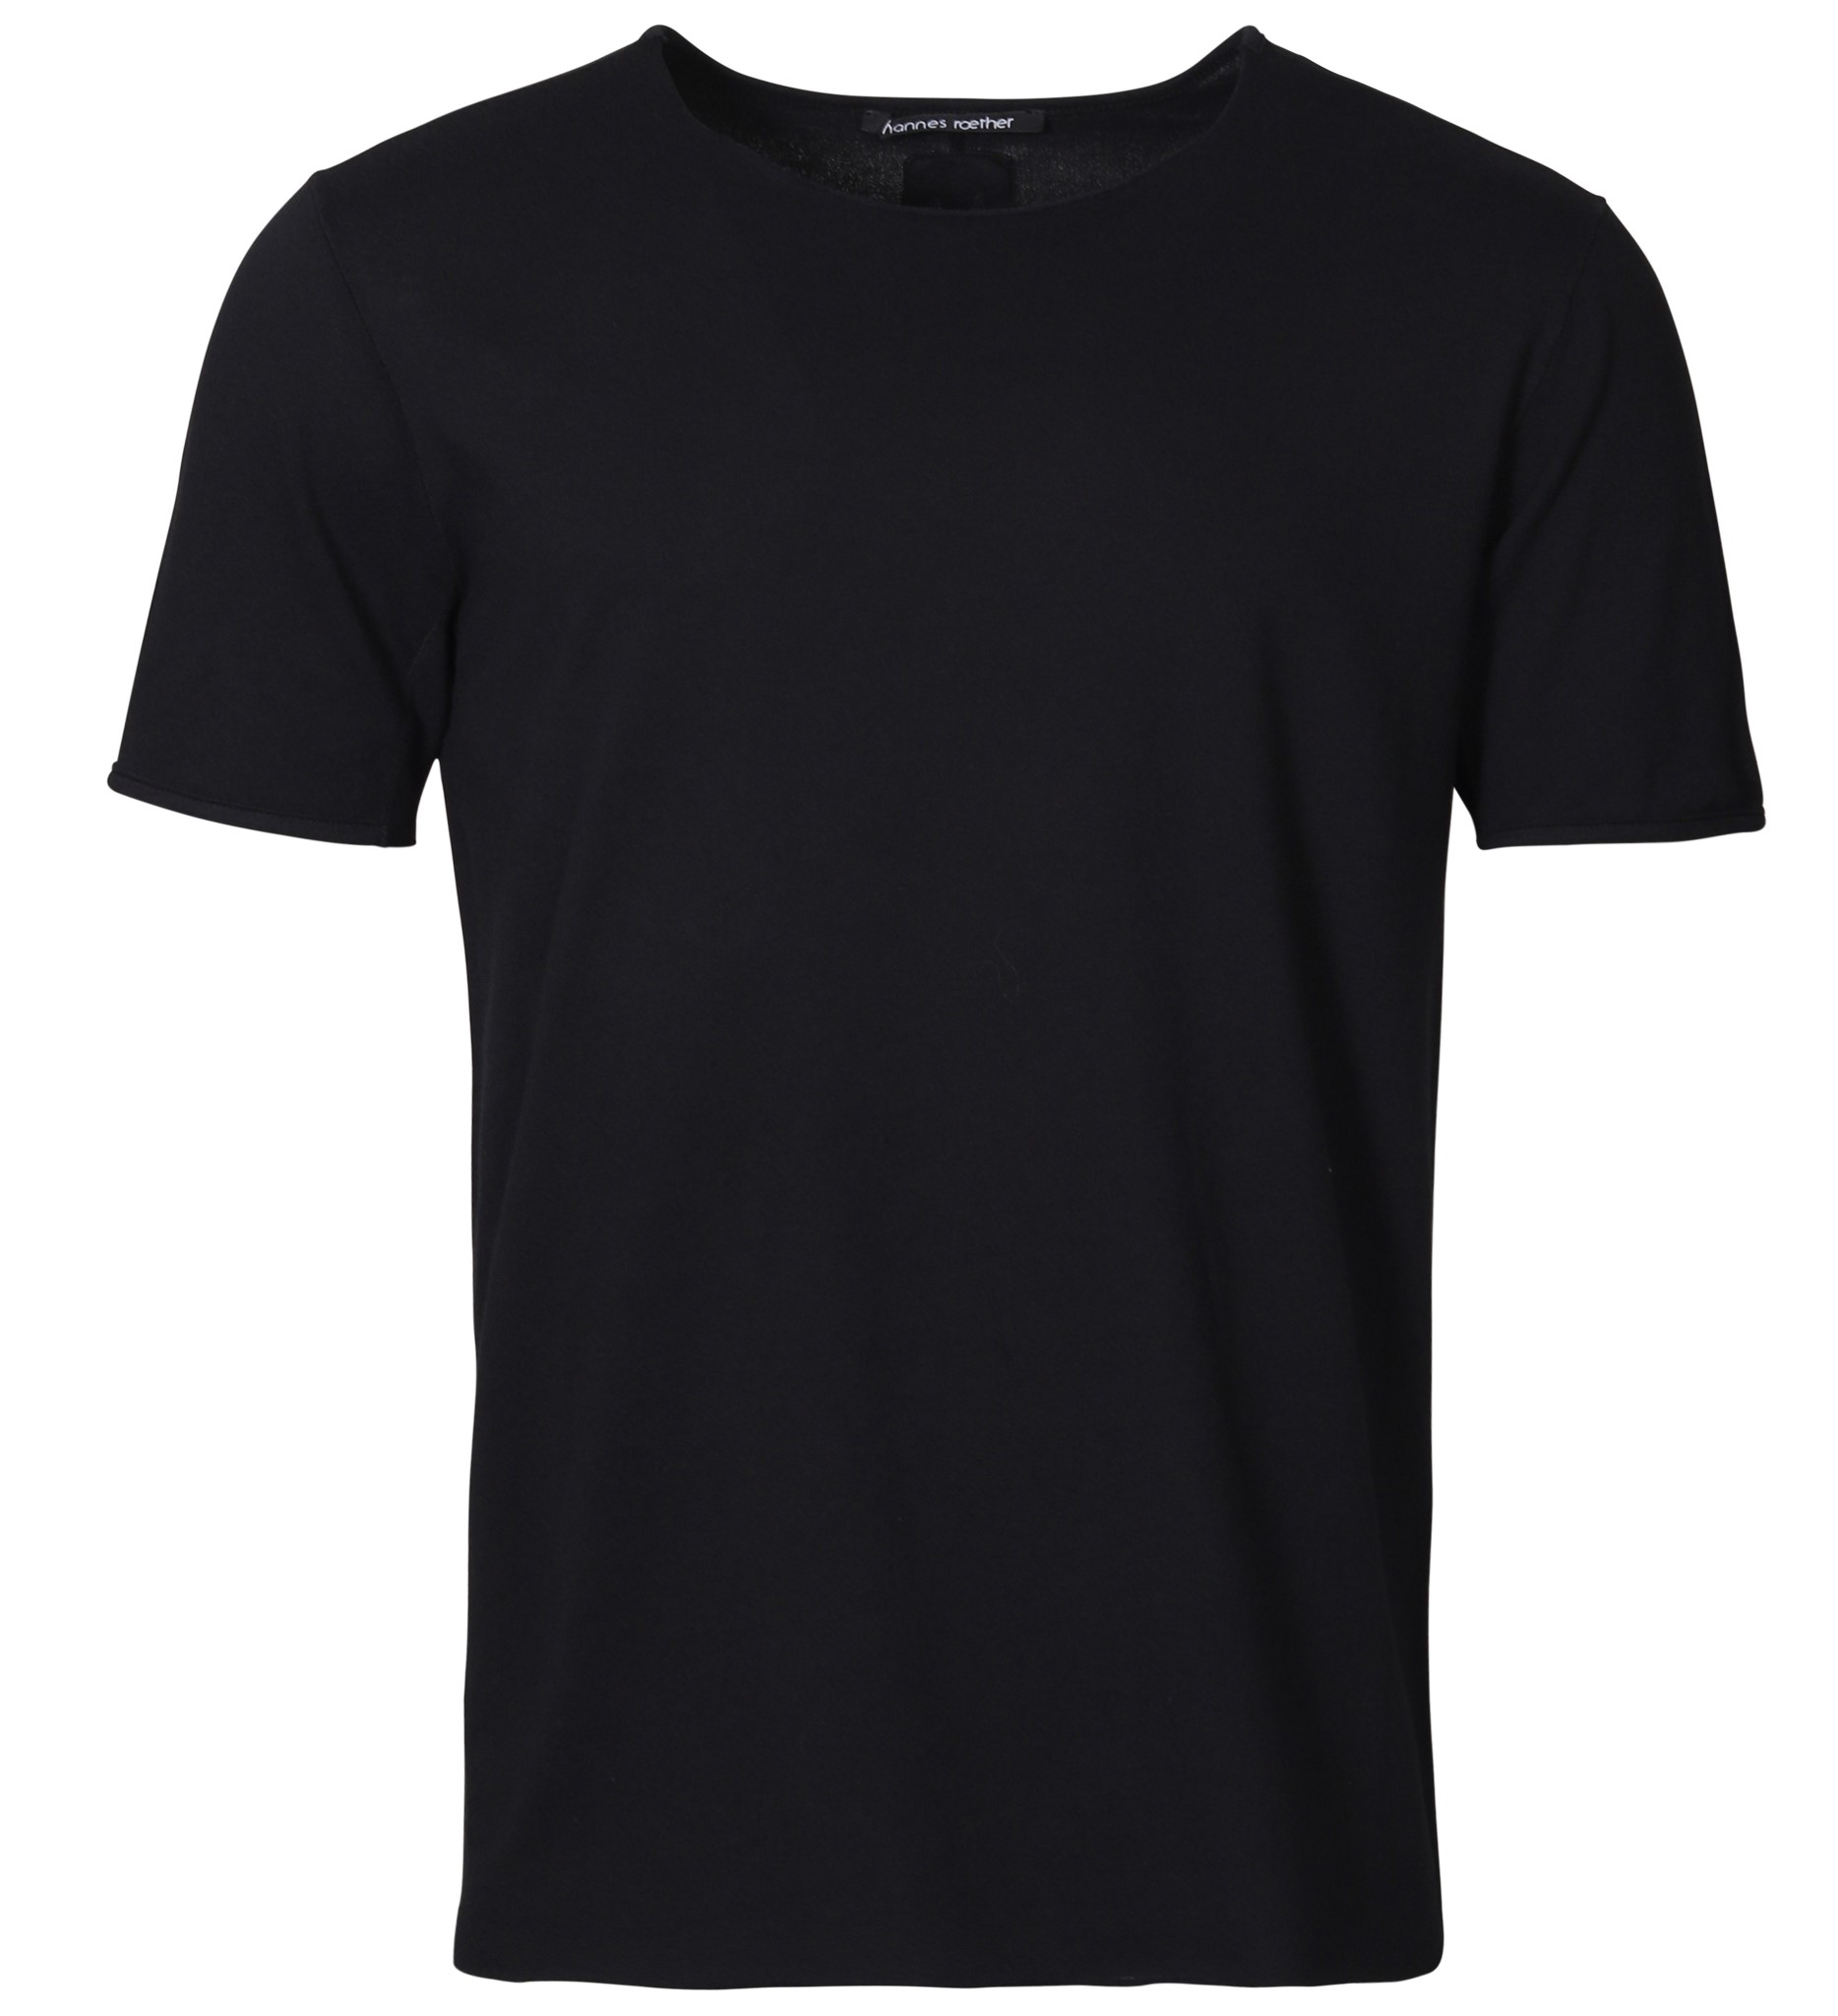 HANNES ROETHER T-Shirt in Black S